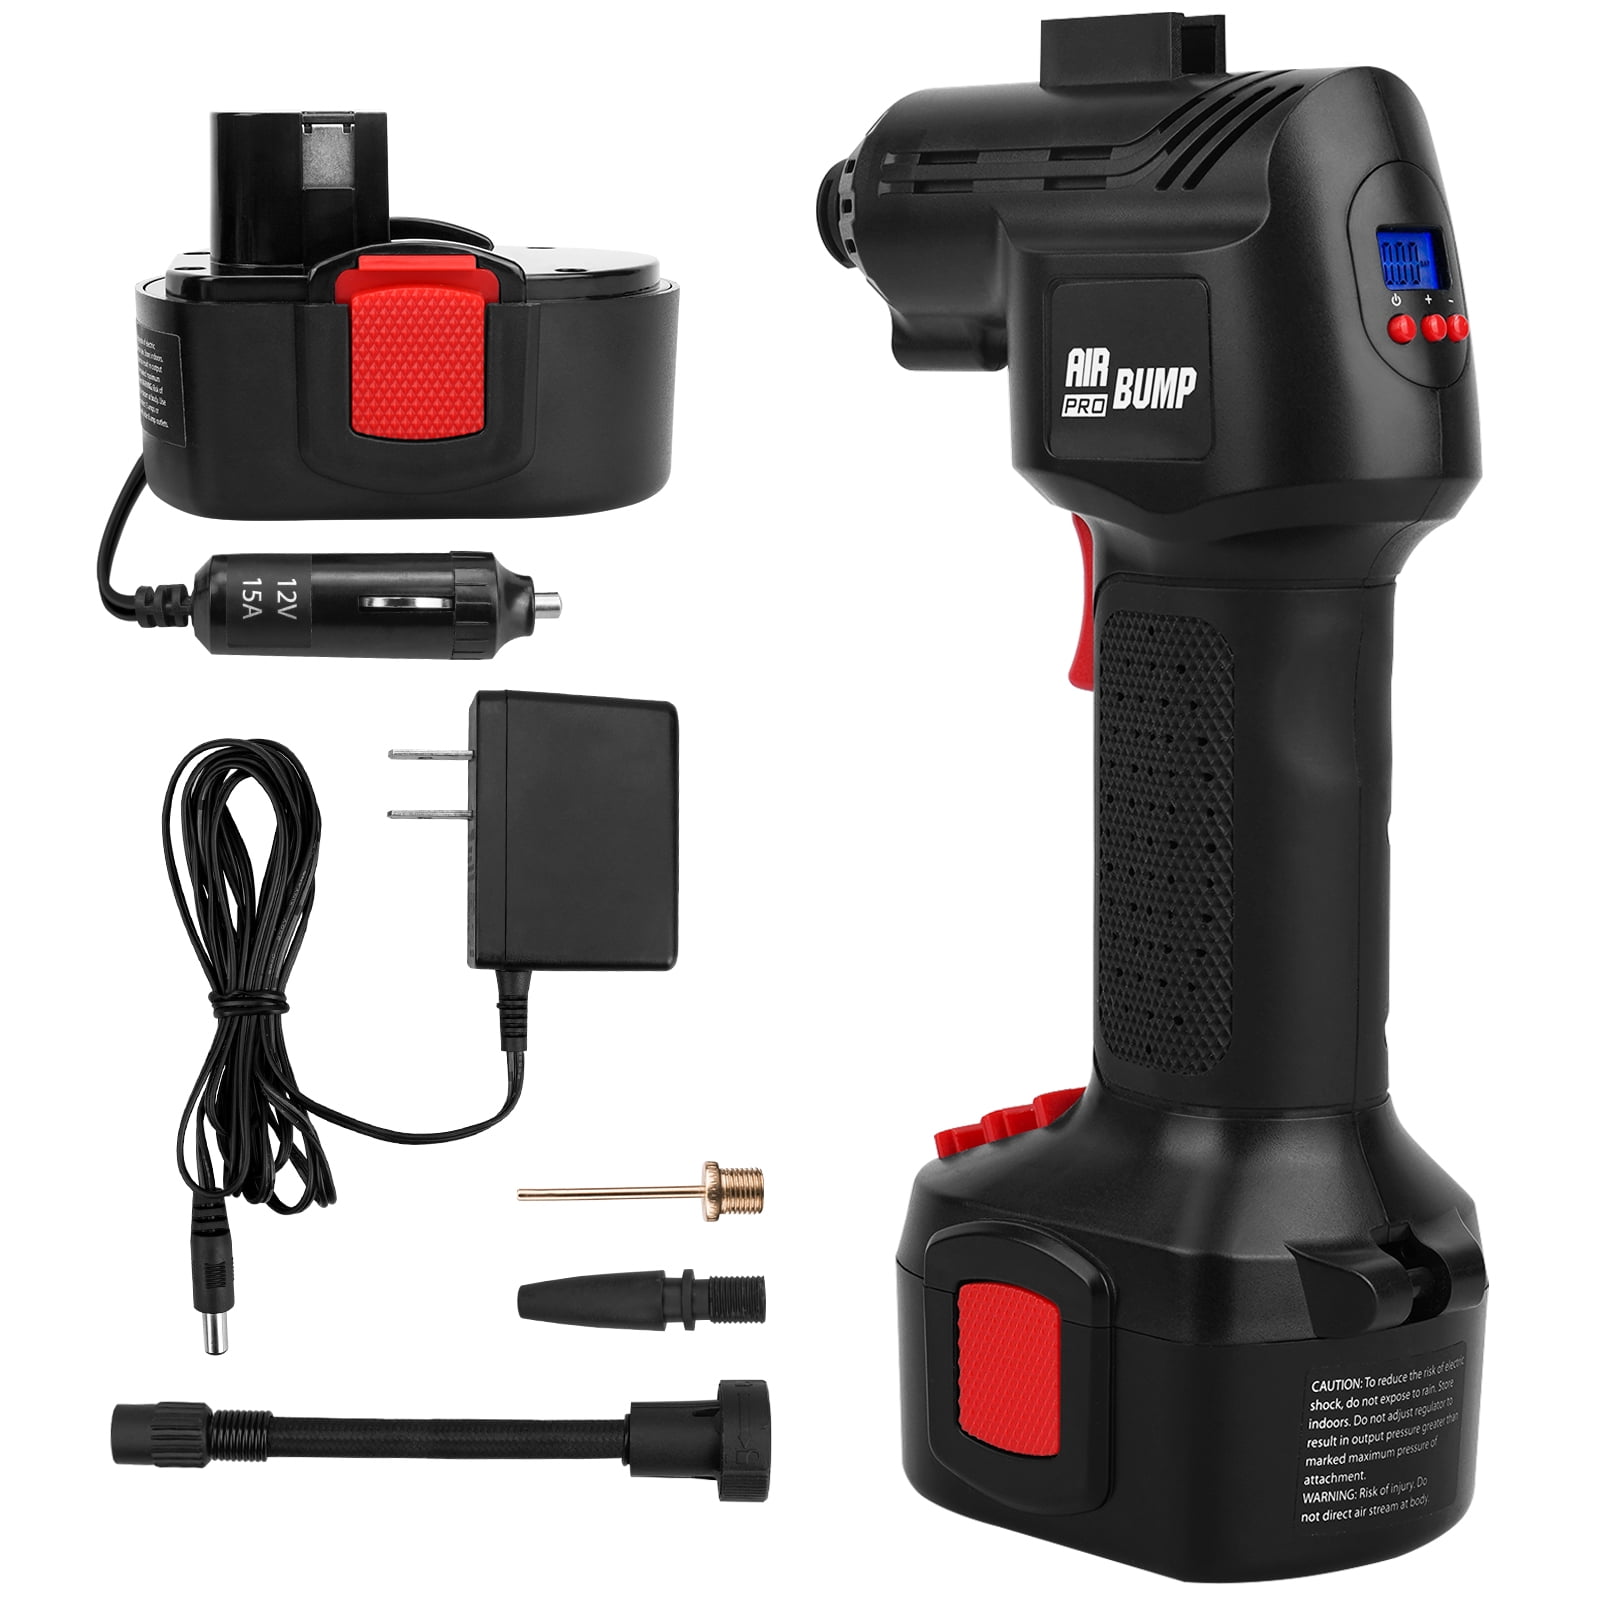 Cordless Portable Air Pump Pro Tire Inflator, Automatic Compressor with 12V  Auto Shutoff Digital Pressure Gauge for Inflating Tires, Air Beds, Sporting   Pool Equipments.